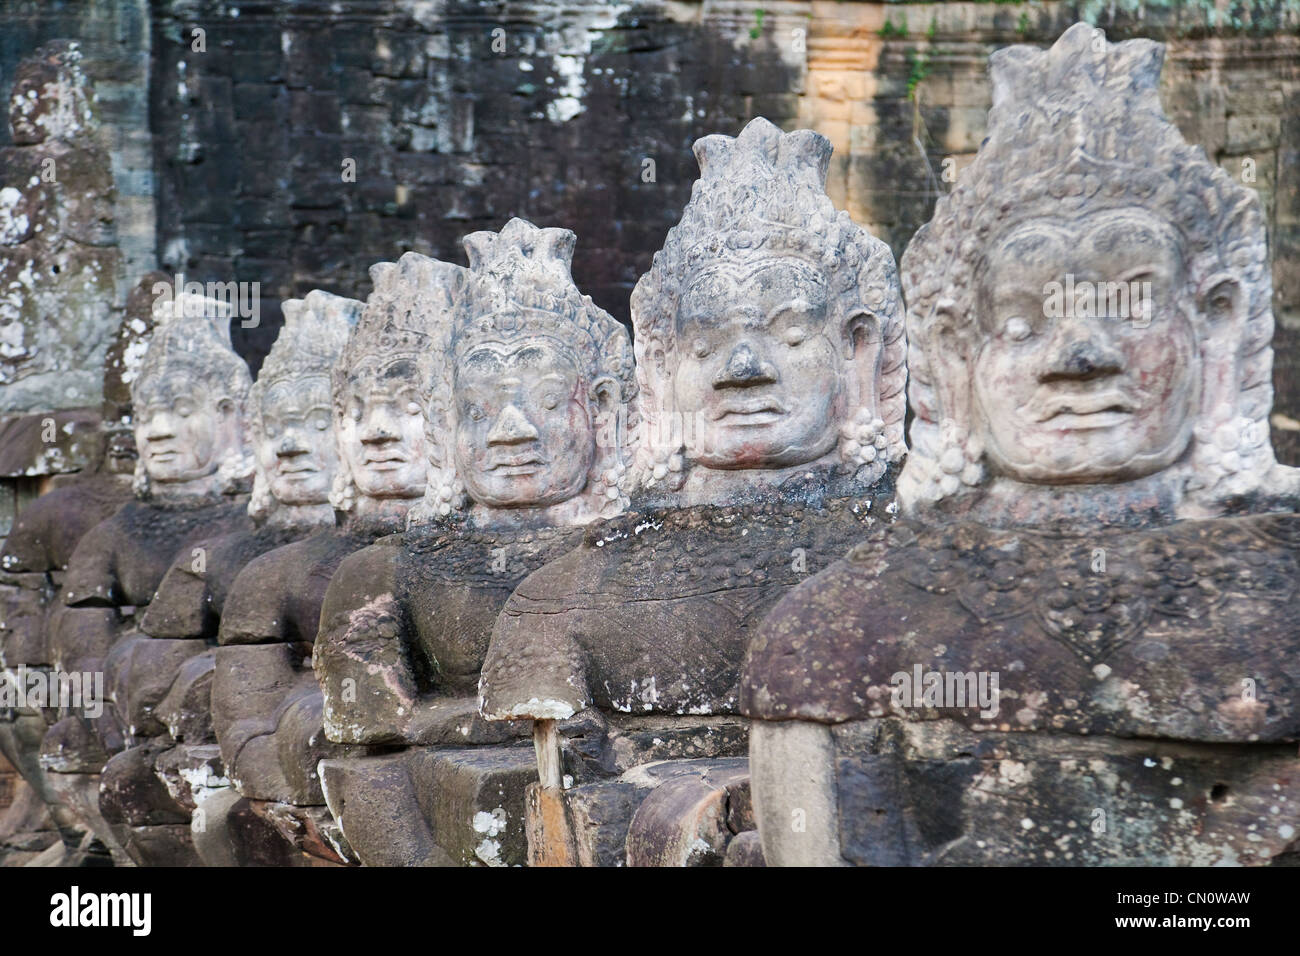 Buddhist statues at Bayan Temple, Angkor Thom, UNESCO World Heritage site, Cambodia Stock Photo